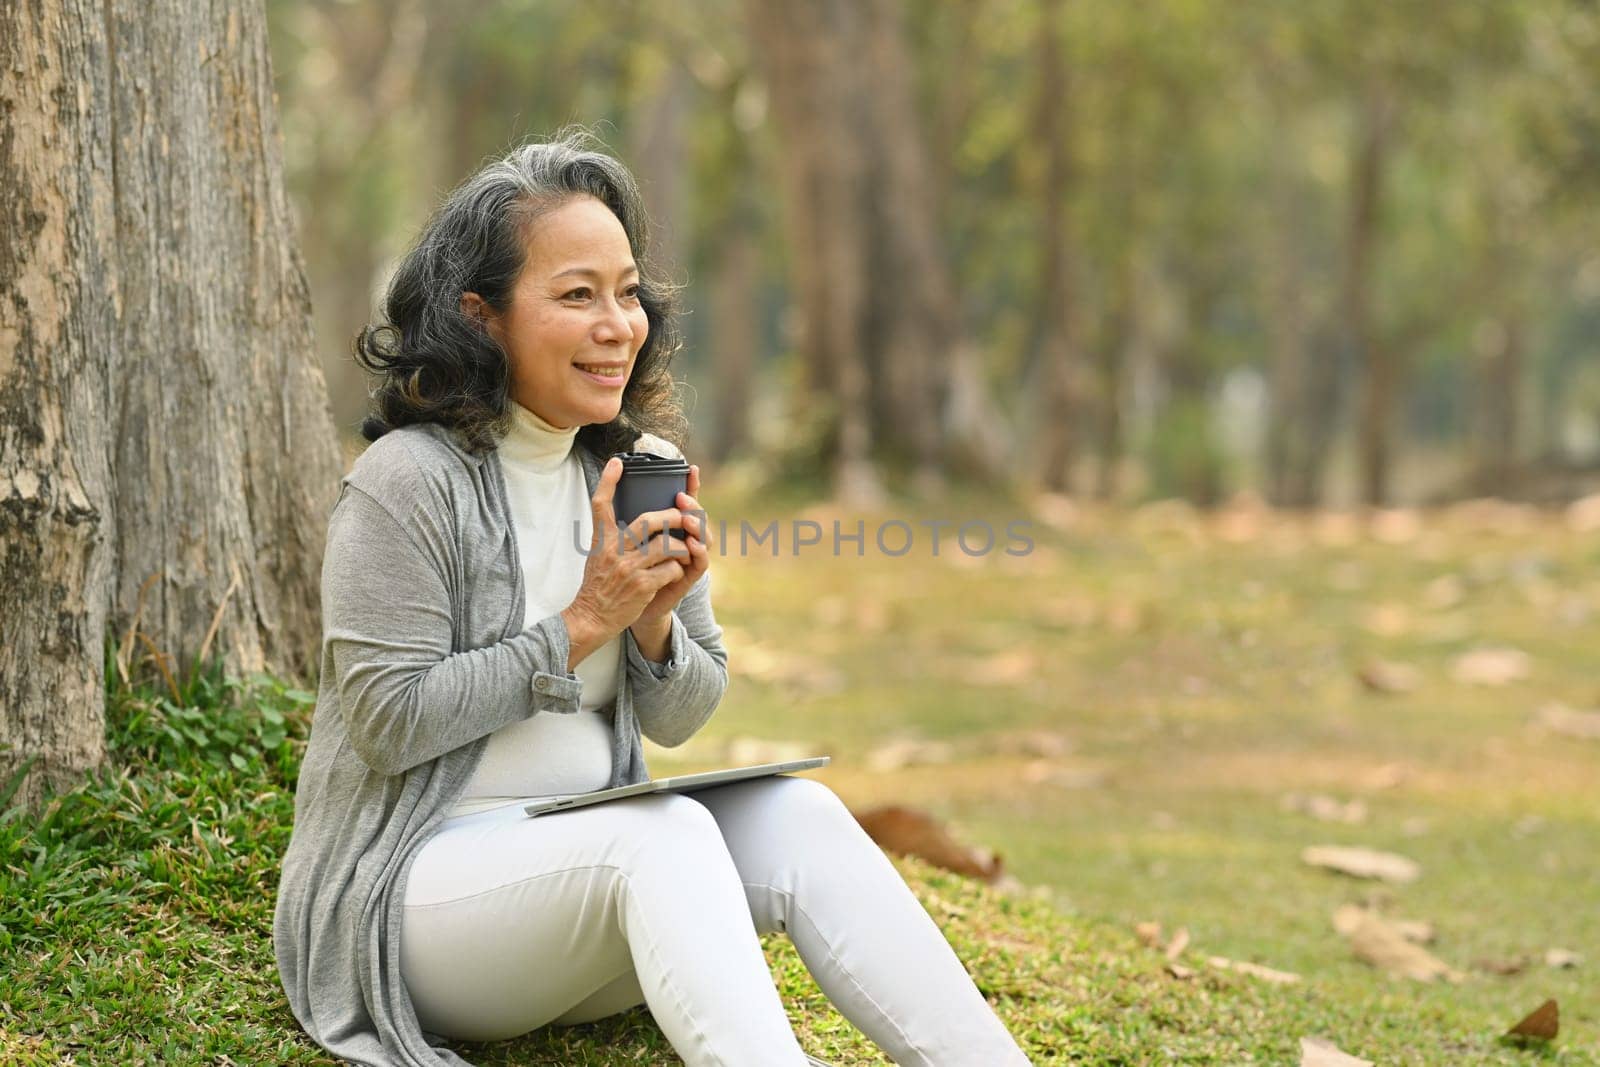 Elegant elderly woman drinking coffee and enjoy outdoor leisure activity on a warm day. Authentic senior retired life concept by prathanchorruangsak